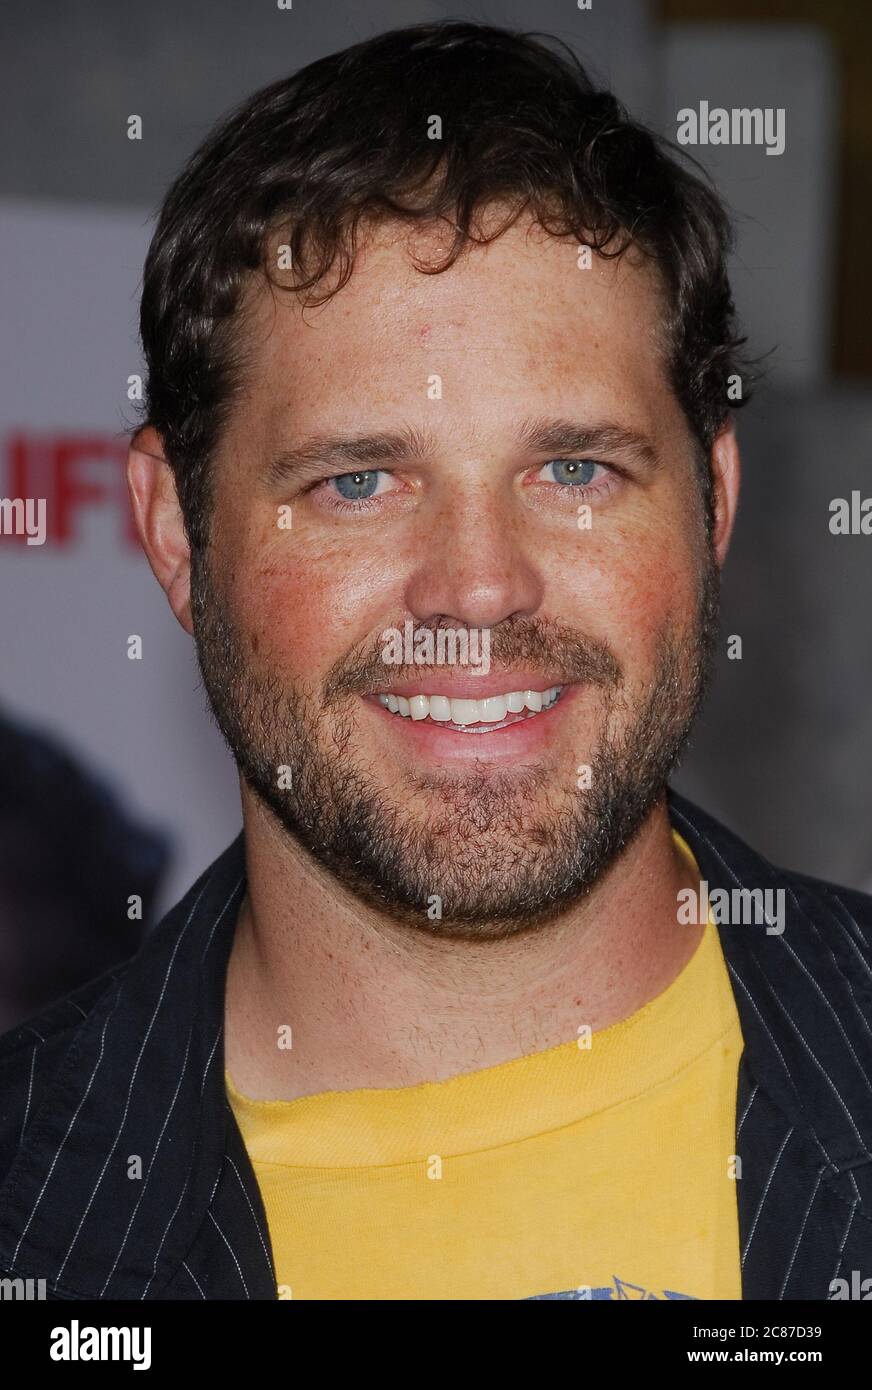 David Denman at the World Premiere of 'Dan In Real Life' held at the El Capitan Theatre in Hollywood, CA. The event took place on Wednesday, October 24, 2007. Photo by: SBM / PictureLux- File Reference # 34006-9032SBMPLX Stock Photo